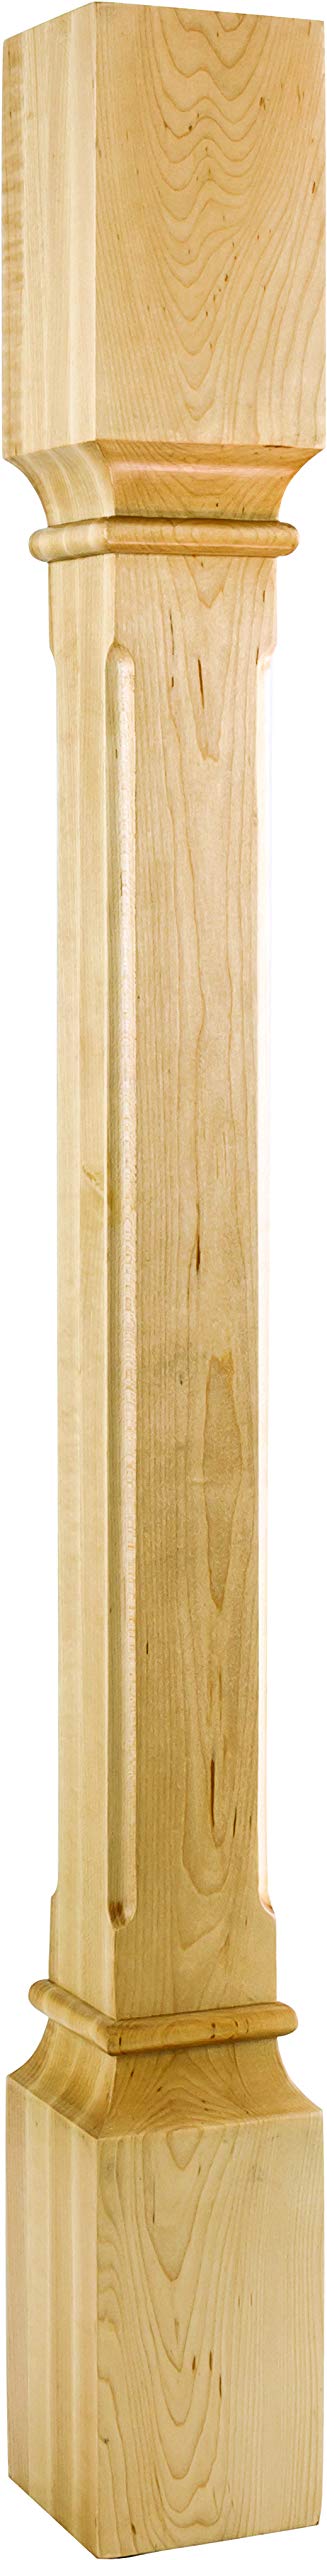 Hardware Resources P38-3.5-RW 3-1/2" W x 3-1/2" D x 35-1/2" H Rubberwood Fluted Edge Post